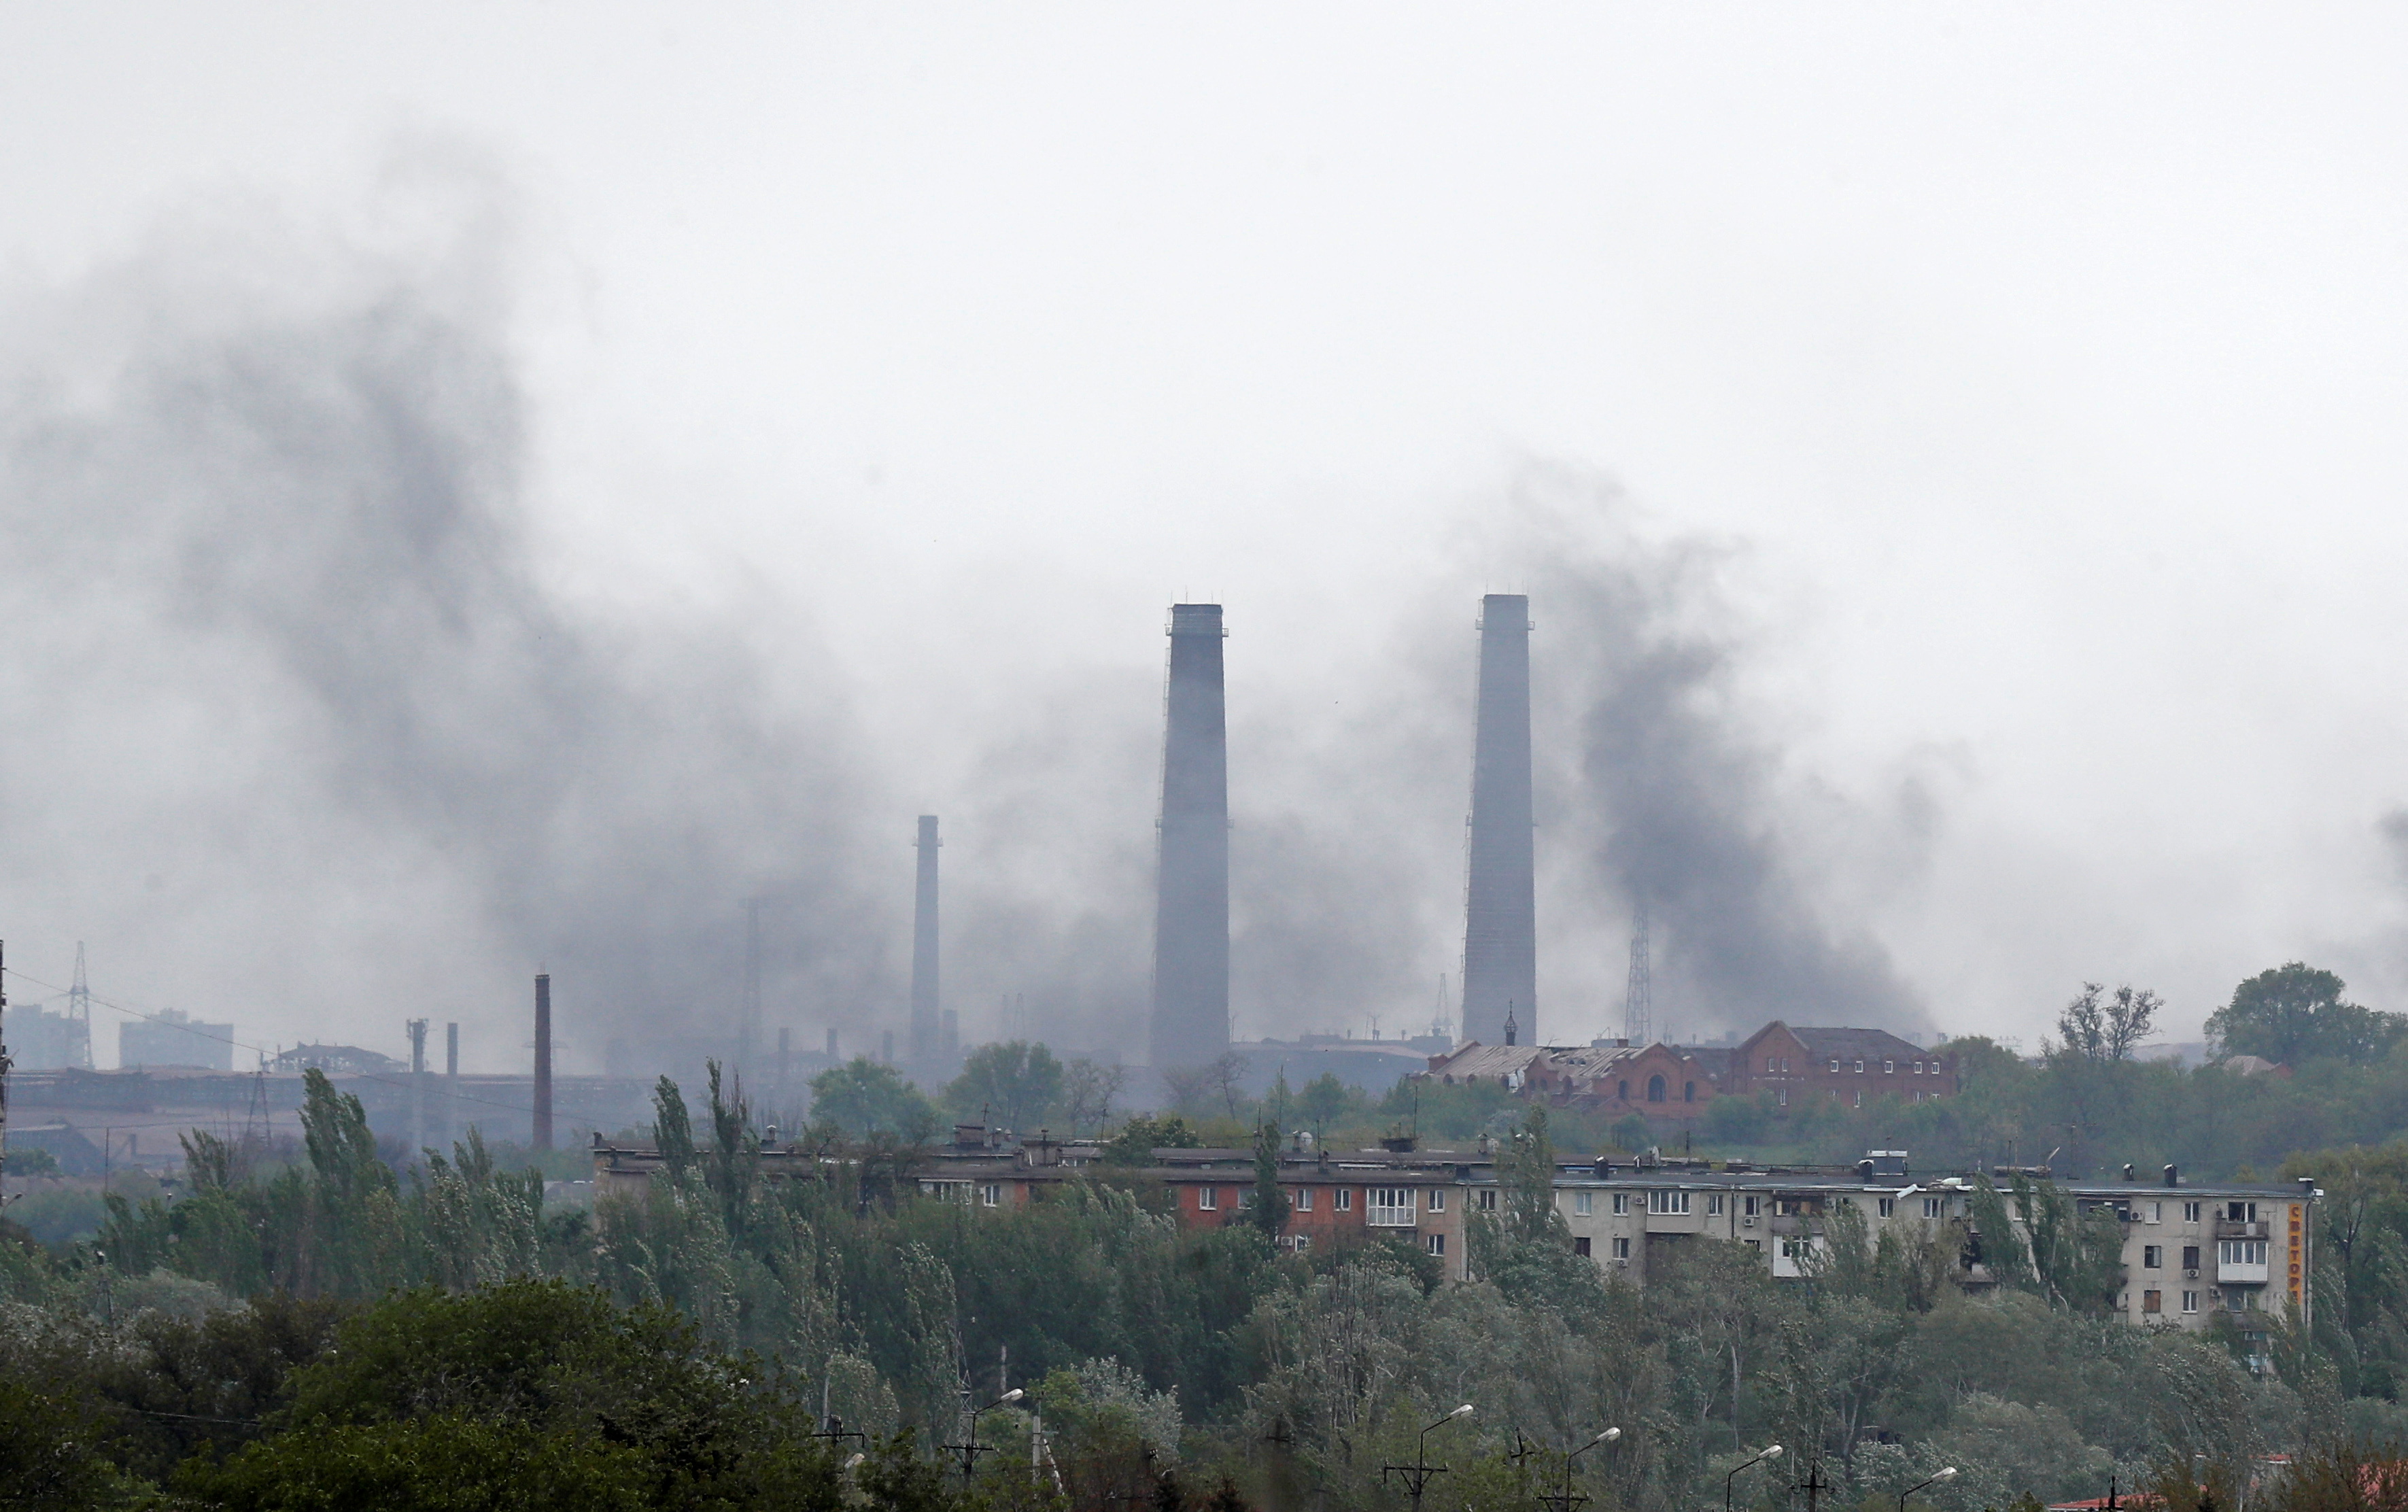 A view shows a plant of Azovstal Iron and Steel Works in Mariupol